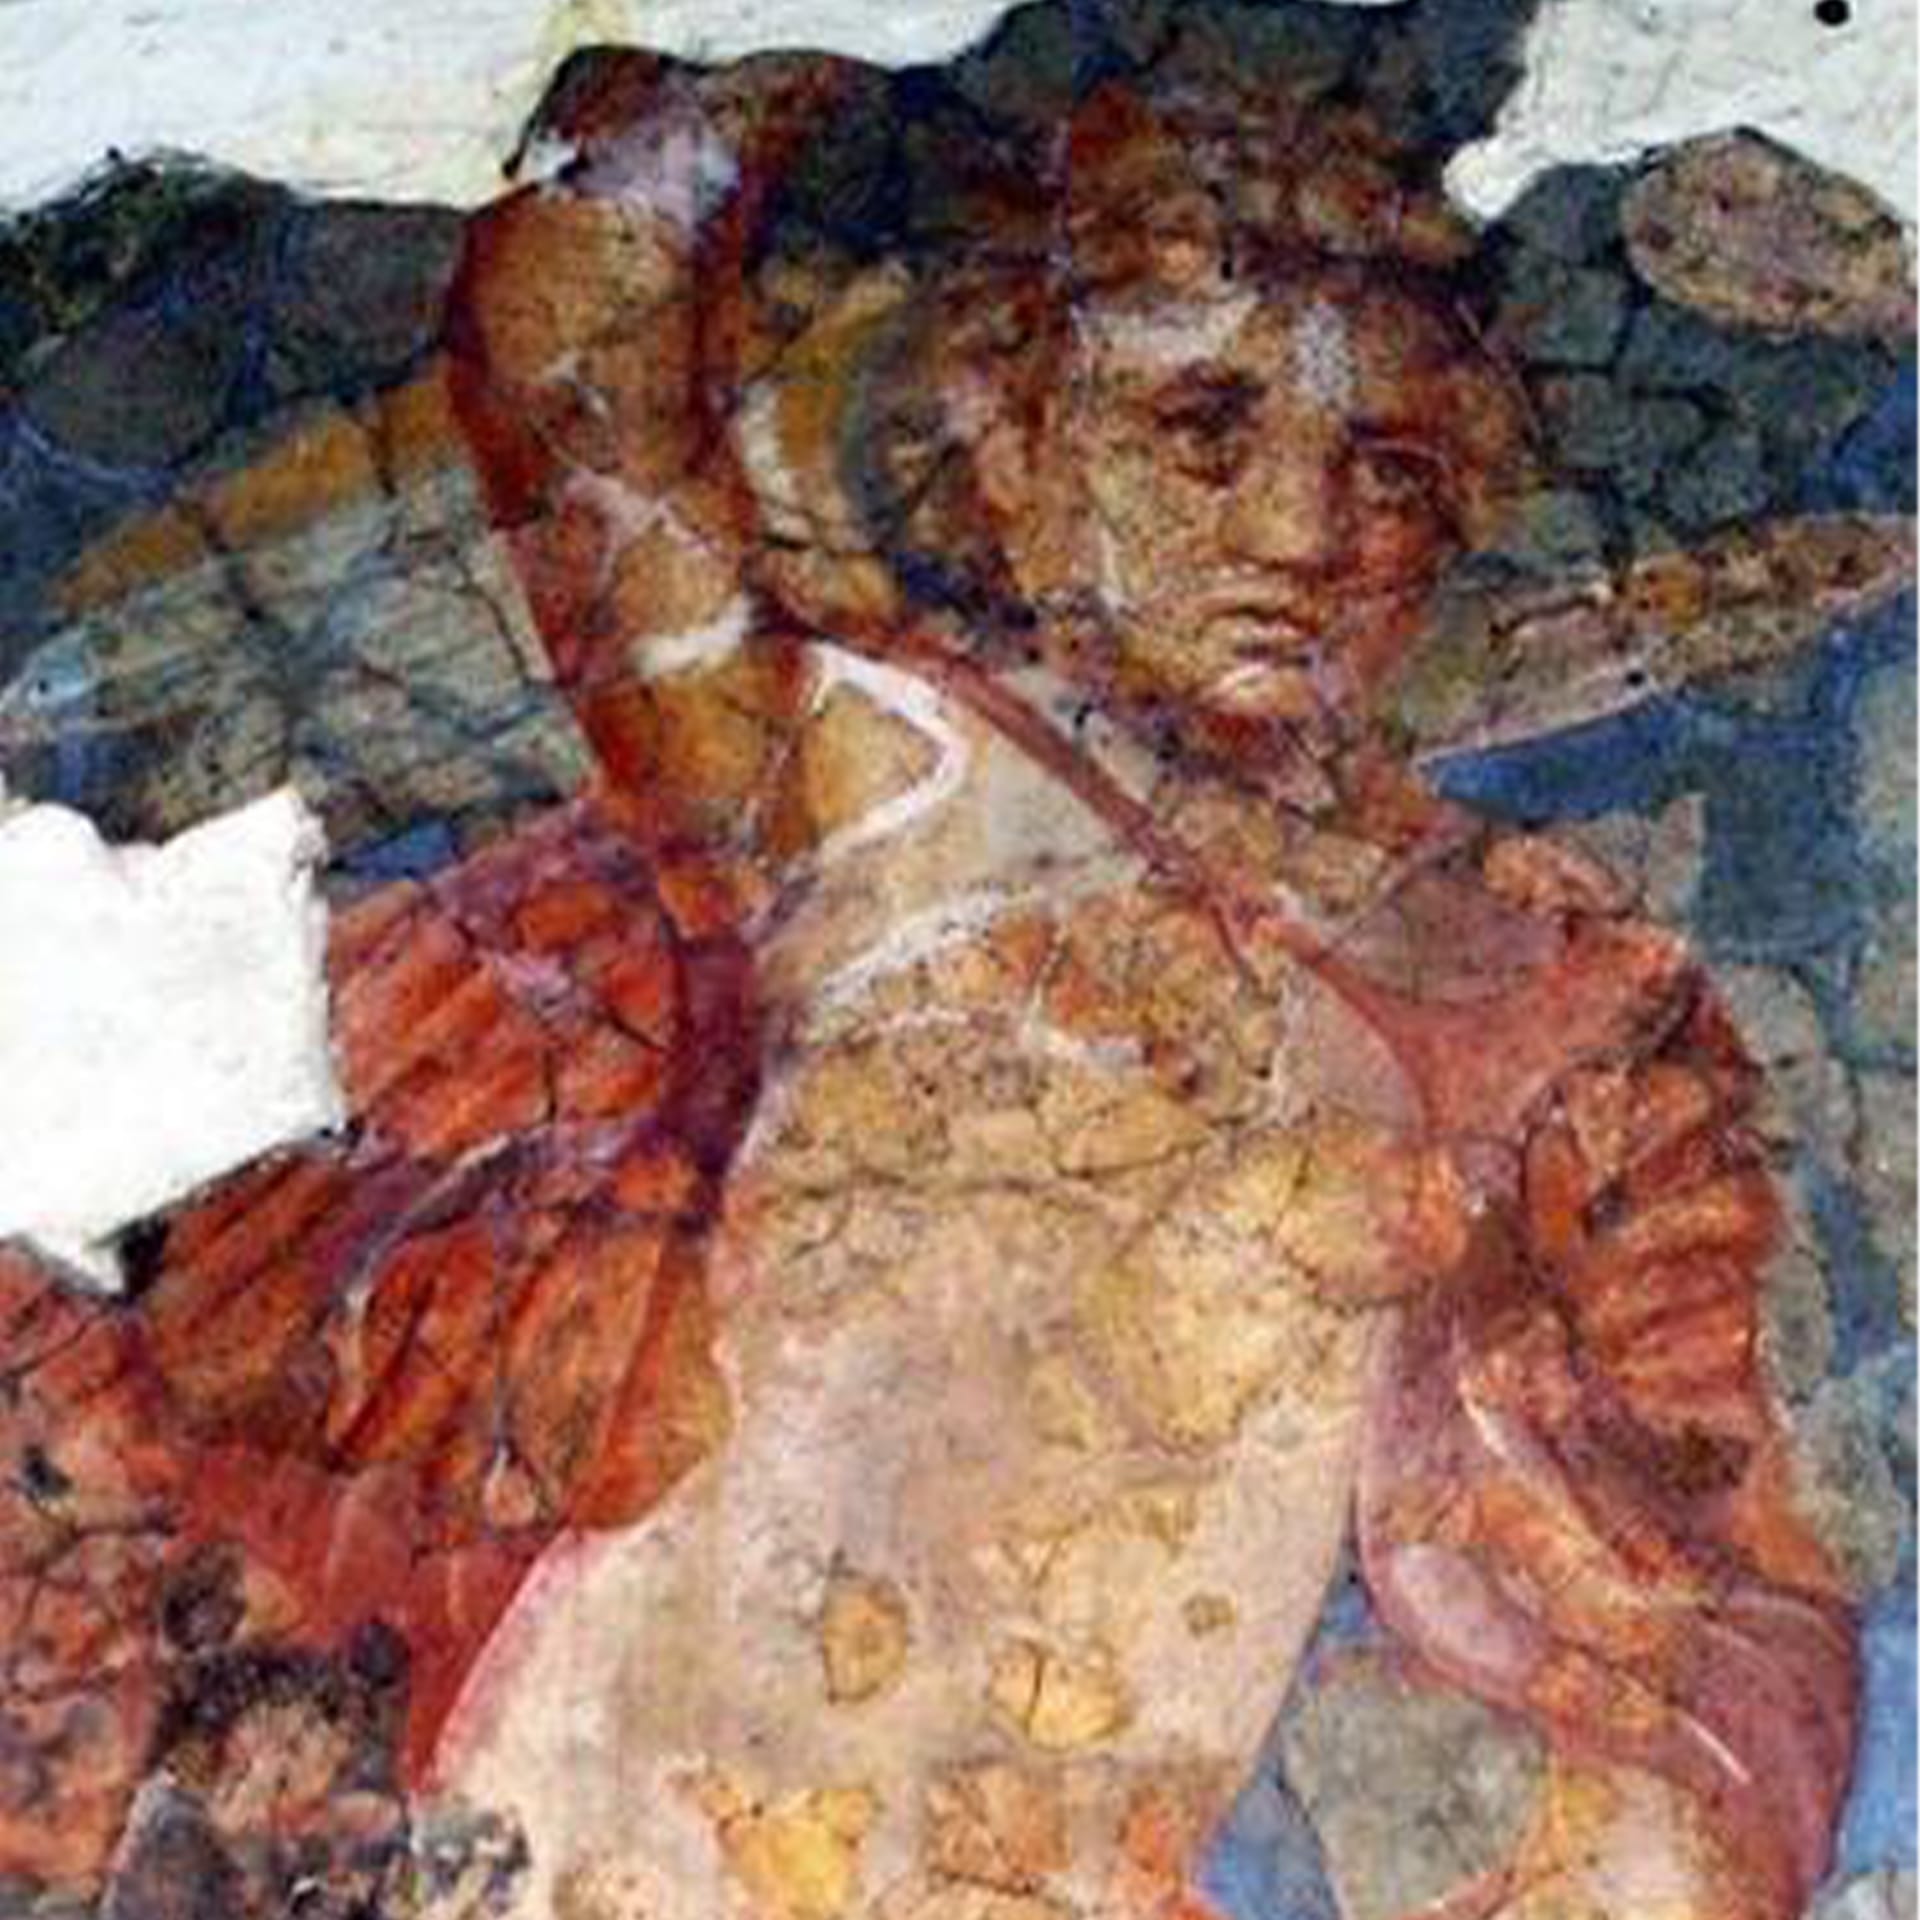 An old painting of a cherub from the Roman era